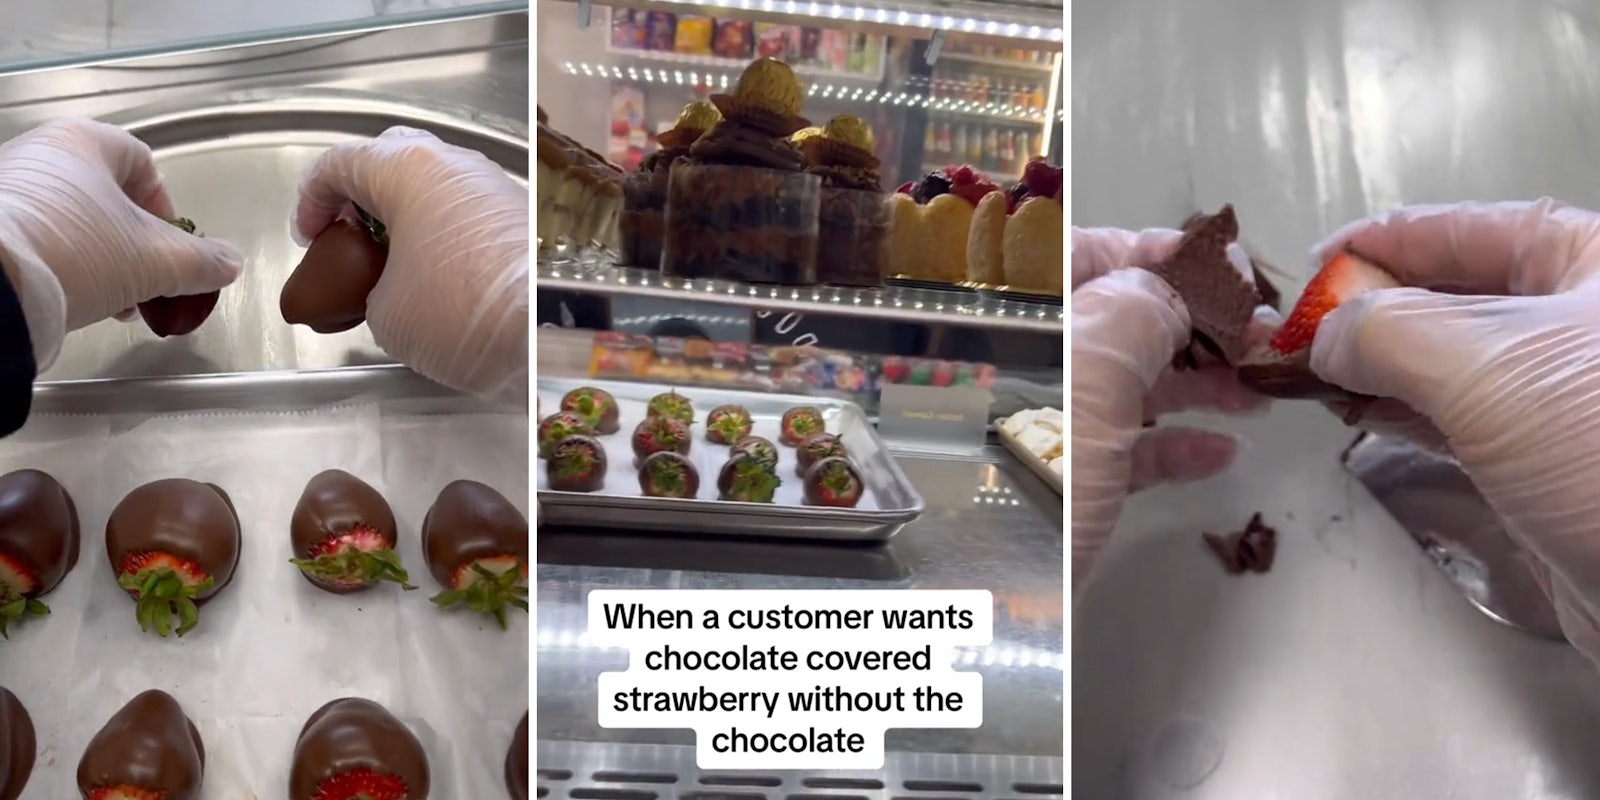 Worker has to peel chocolate off of chocolate-covered strawberries to oblige customer’s bizarre request